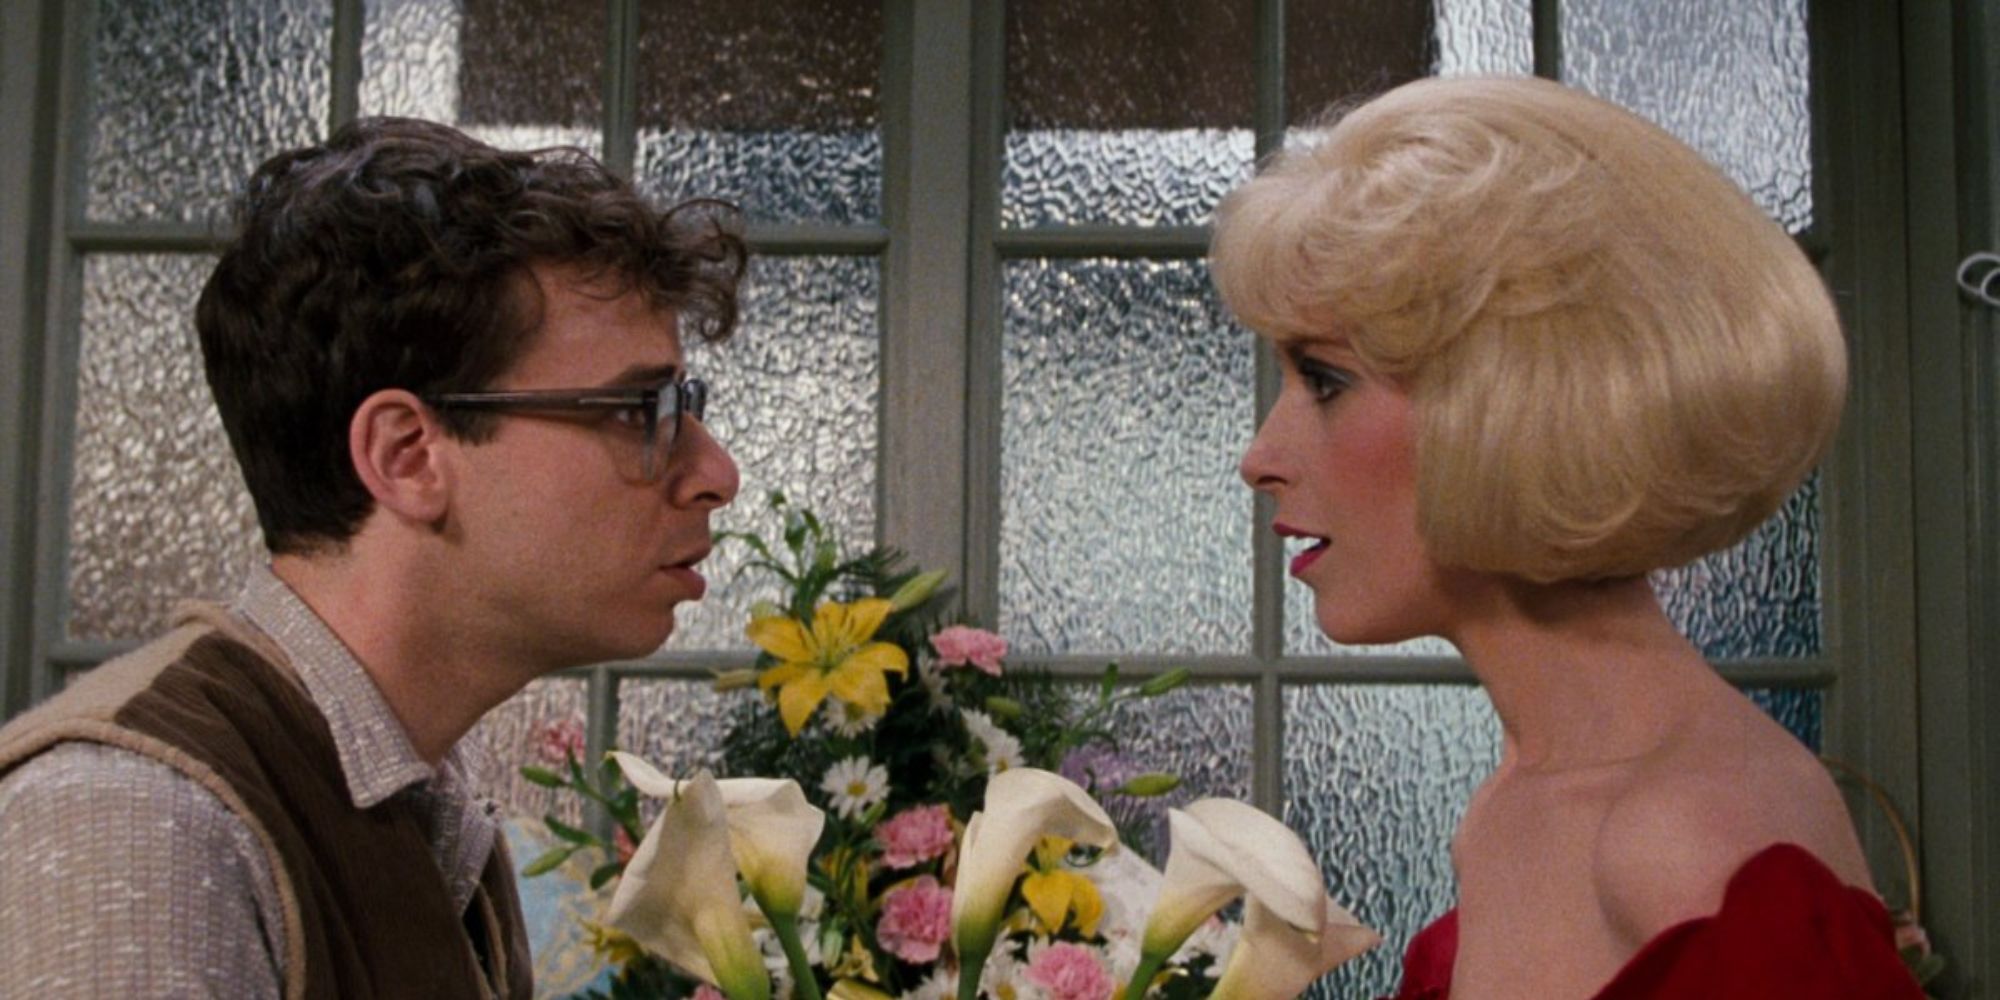 Rick Moranis as Seymour singing with Ellen Greene as Audrey in Little Shop of Horrors